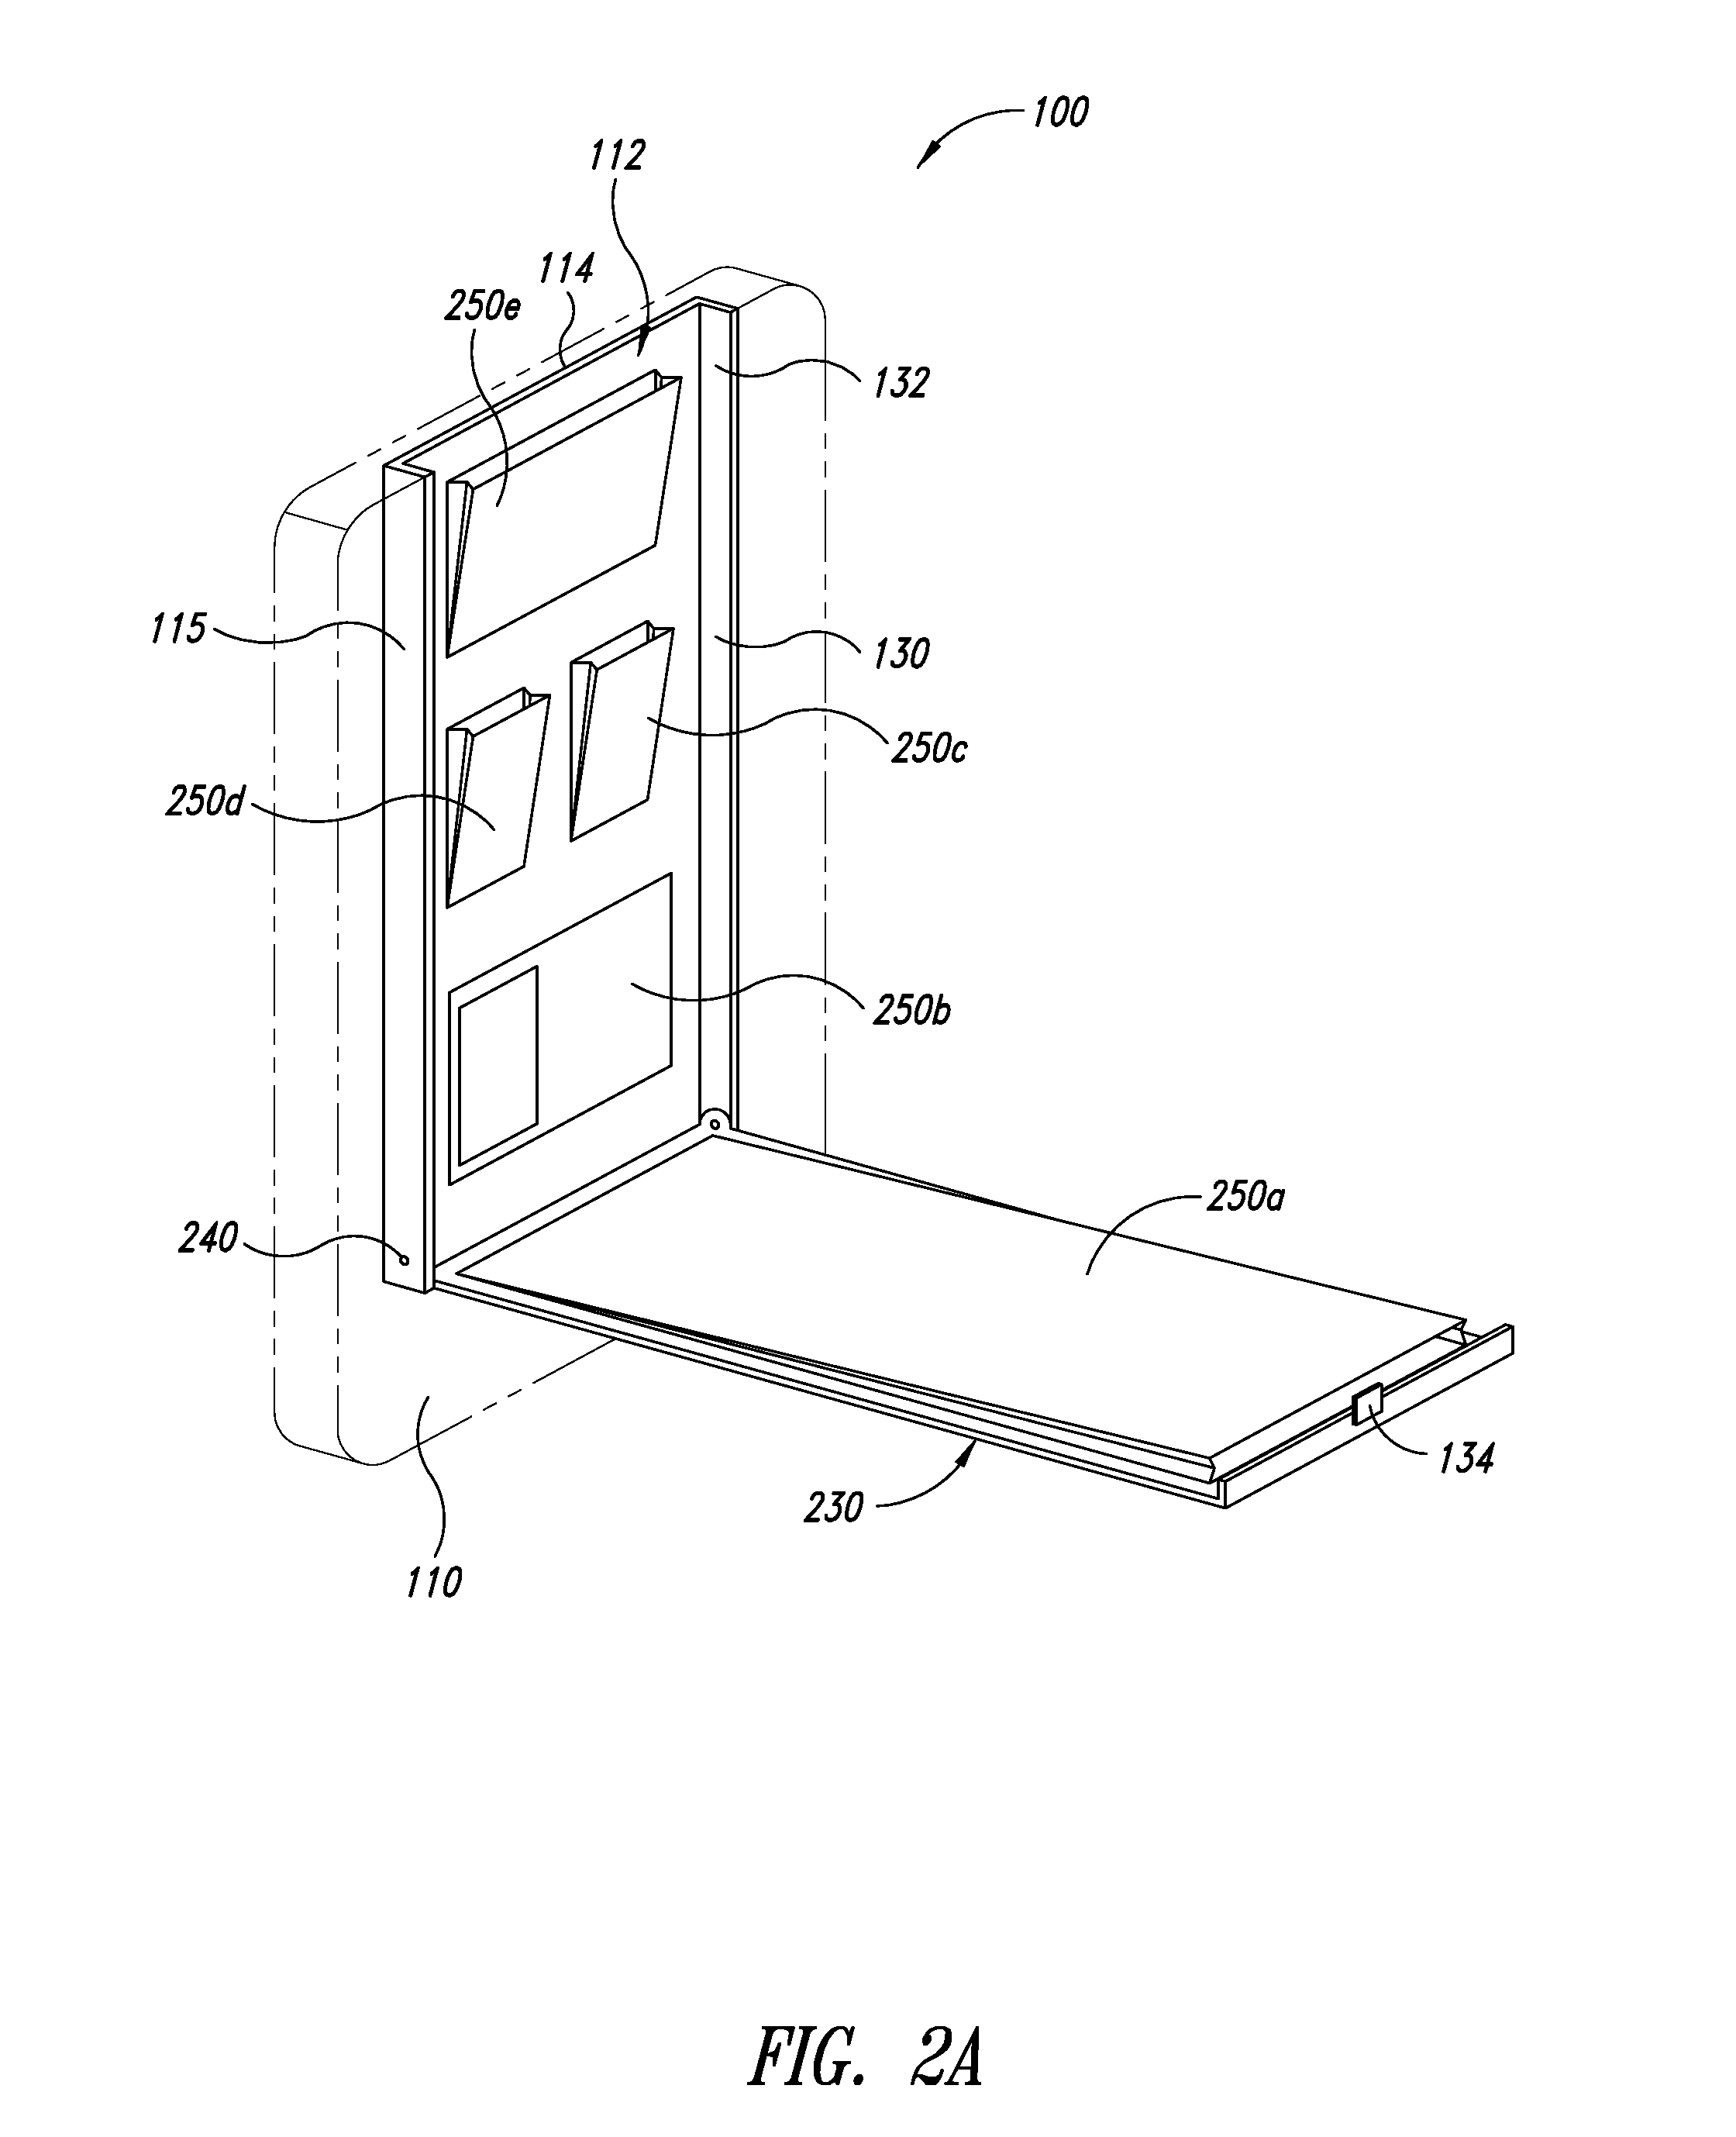 Apparatus and/or kit related to smartphone cases